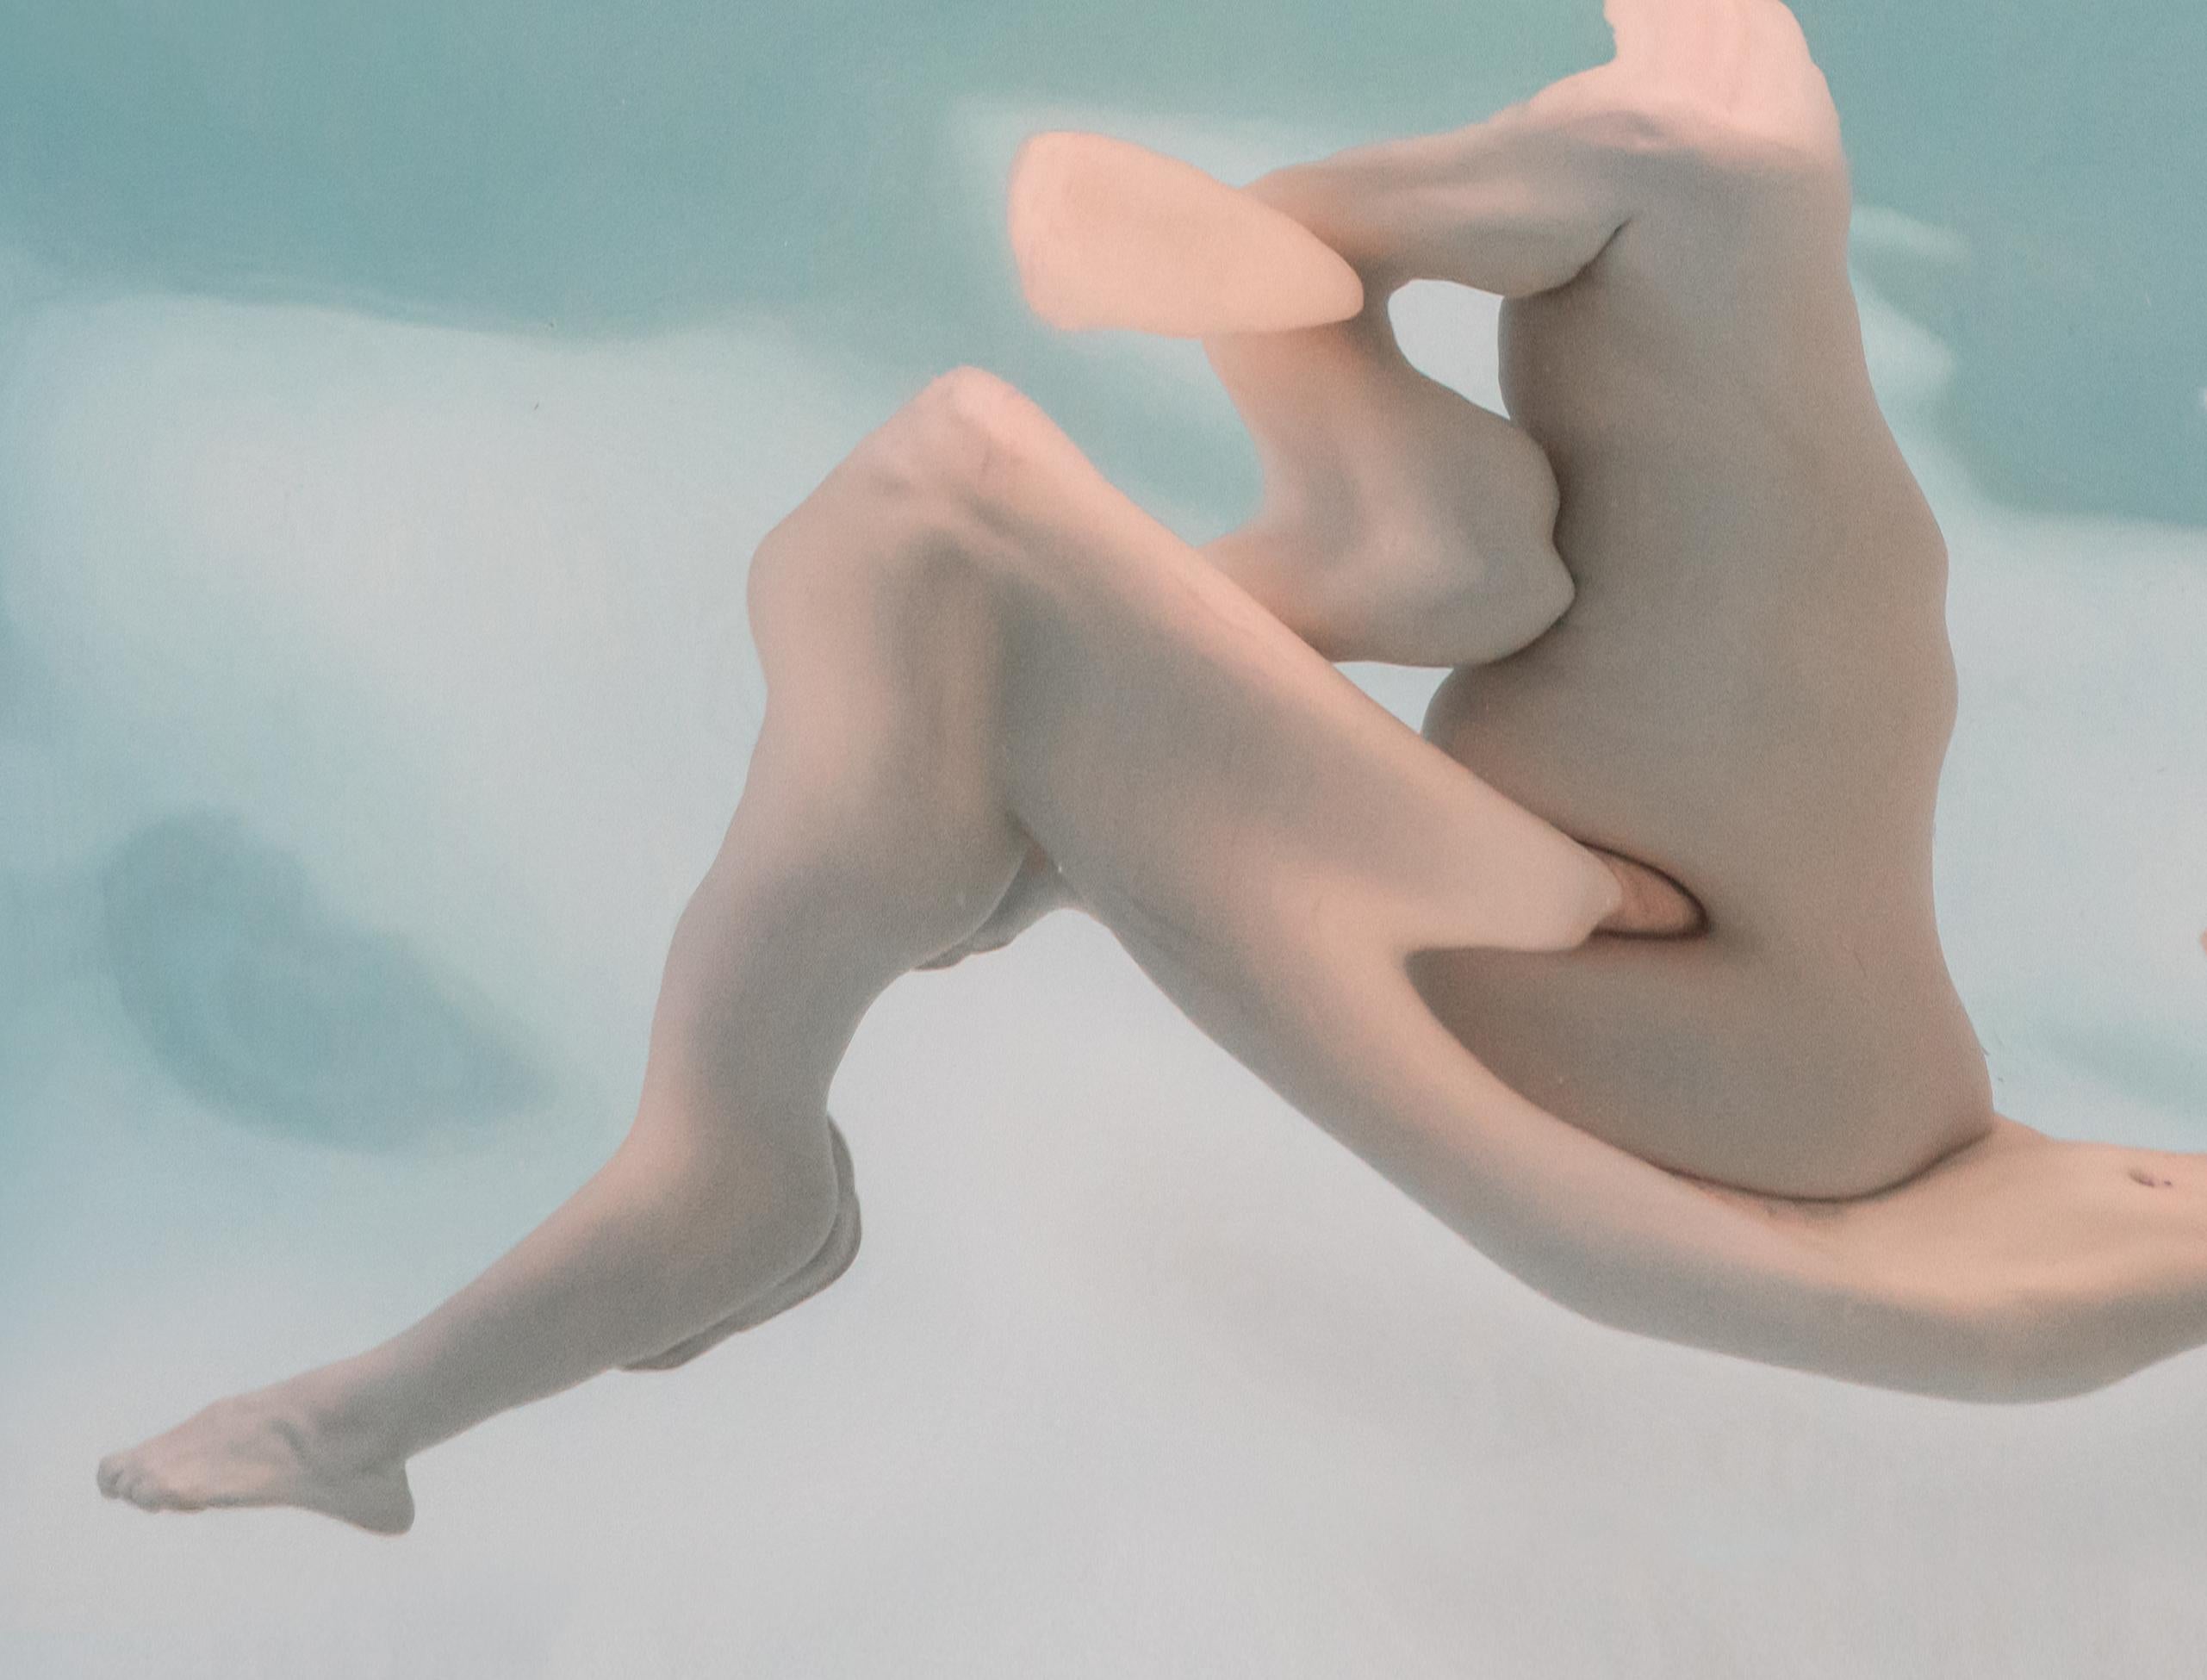 “Exquisite Ghost” is a part of Alex Sher’s popular series Reflections - underwater photographs that could be almost mistaken for abstract paintings as they bring up recollections of masterpieces by Picasso, Dali or Edvard Munch. In fact Reflections